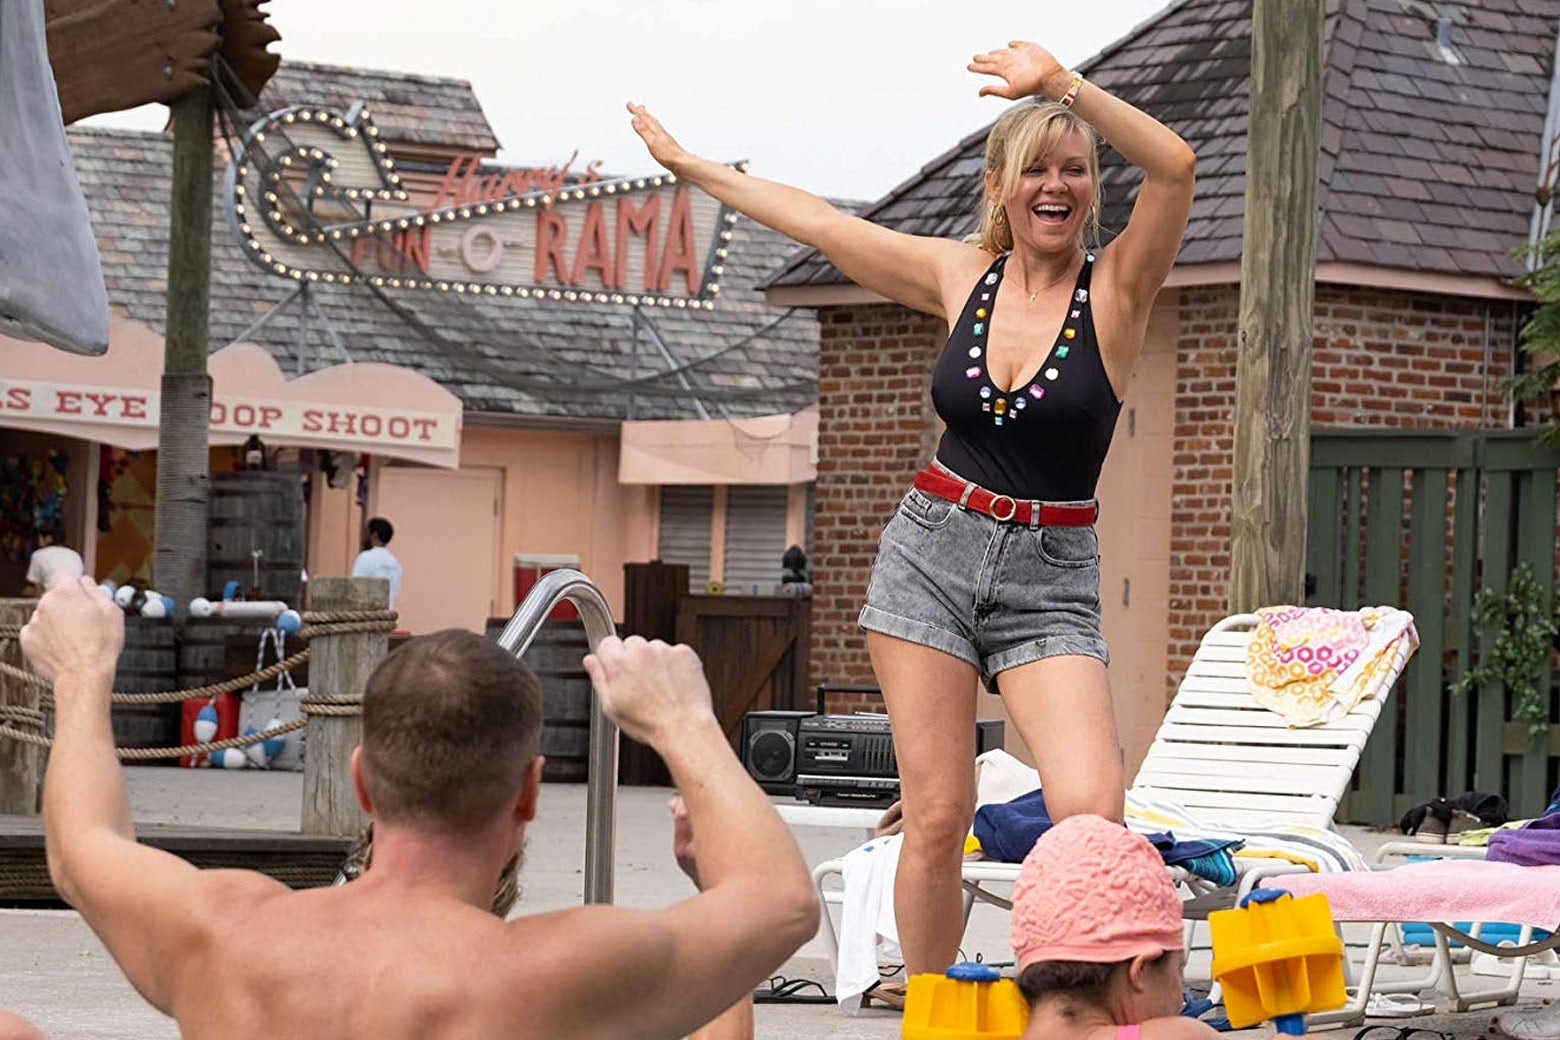 Kirsten Dunst, as Krystal Stubbs, dances by a pool at the water park in the show.